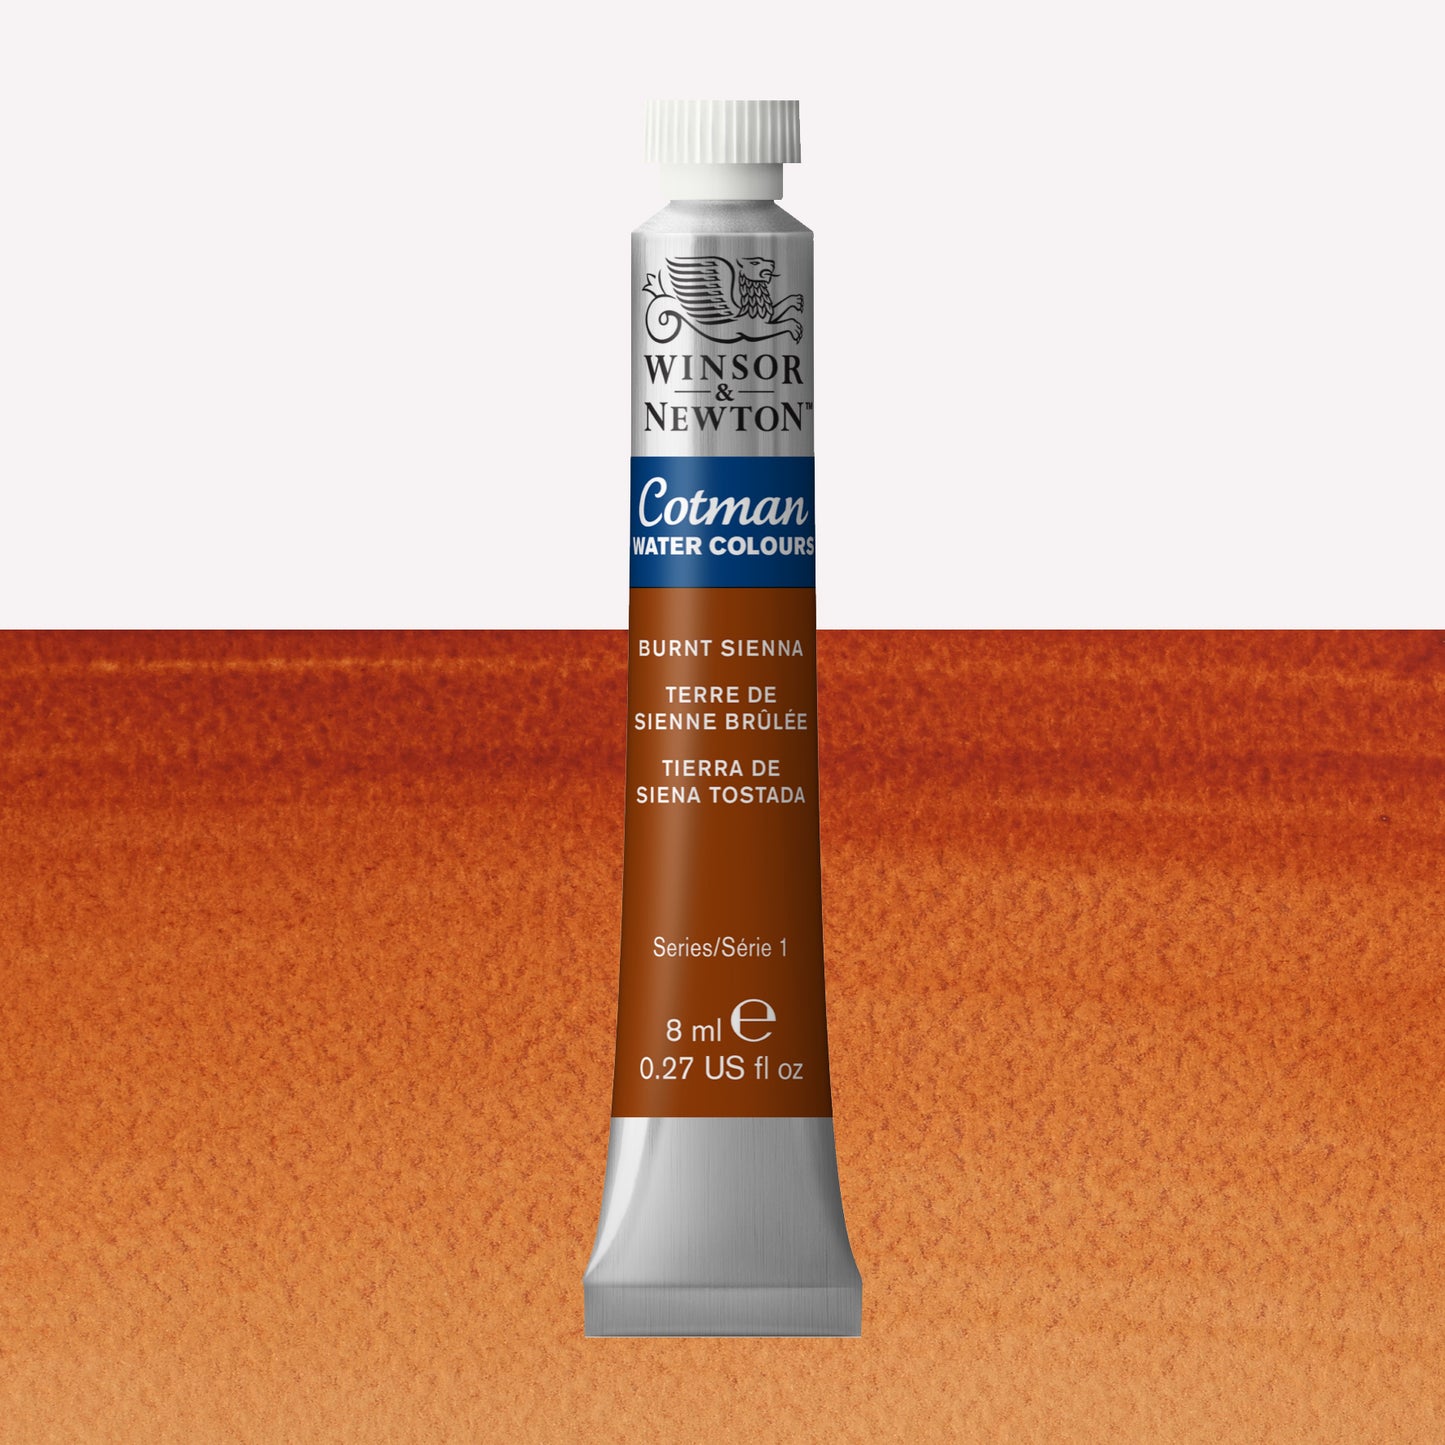 Winsor & Newton Cotman watercolour paint packaged in 8ml silver tube with a white lid in the shade Burnt Sienna  over a highly pigmented colour swatch.